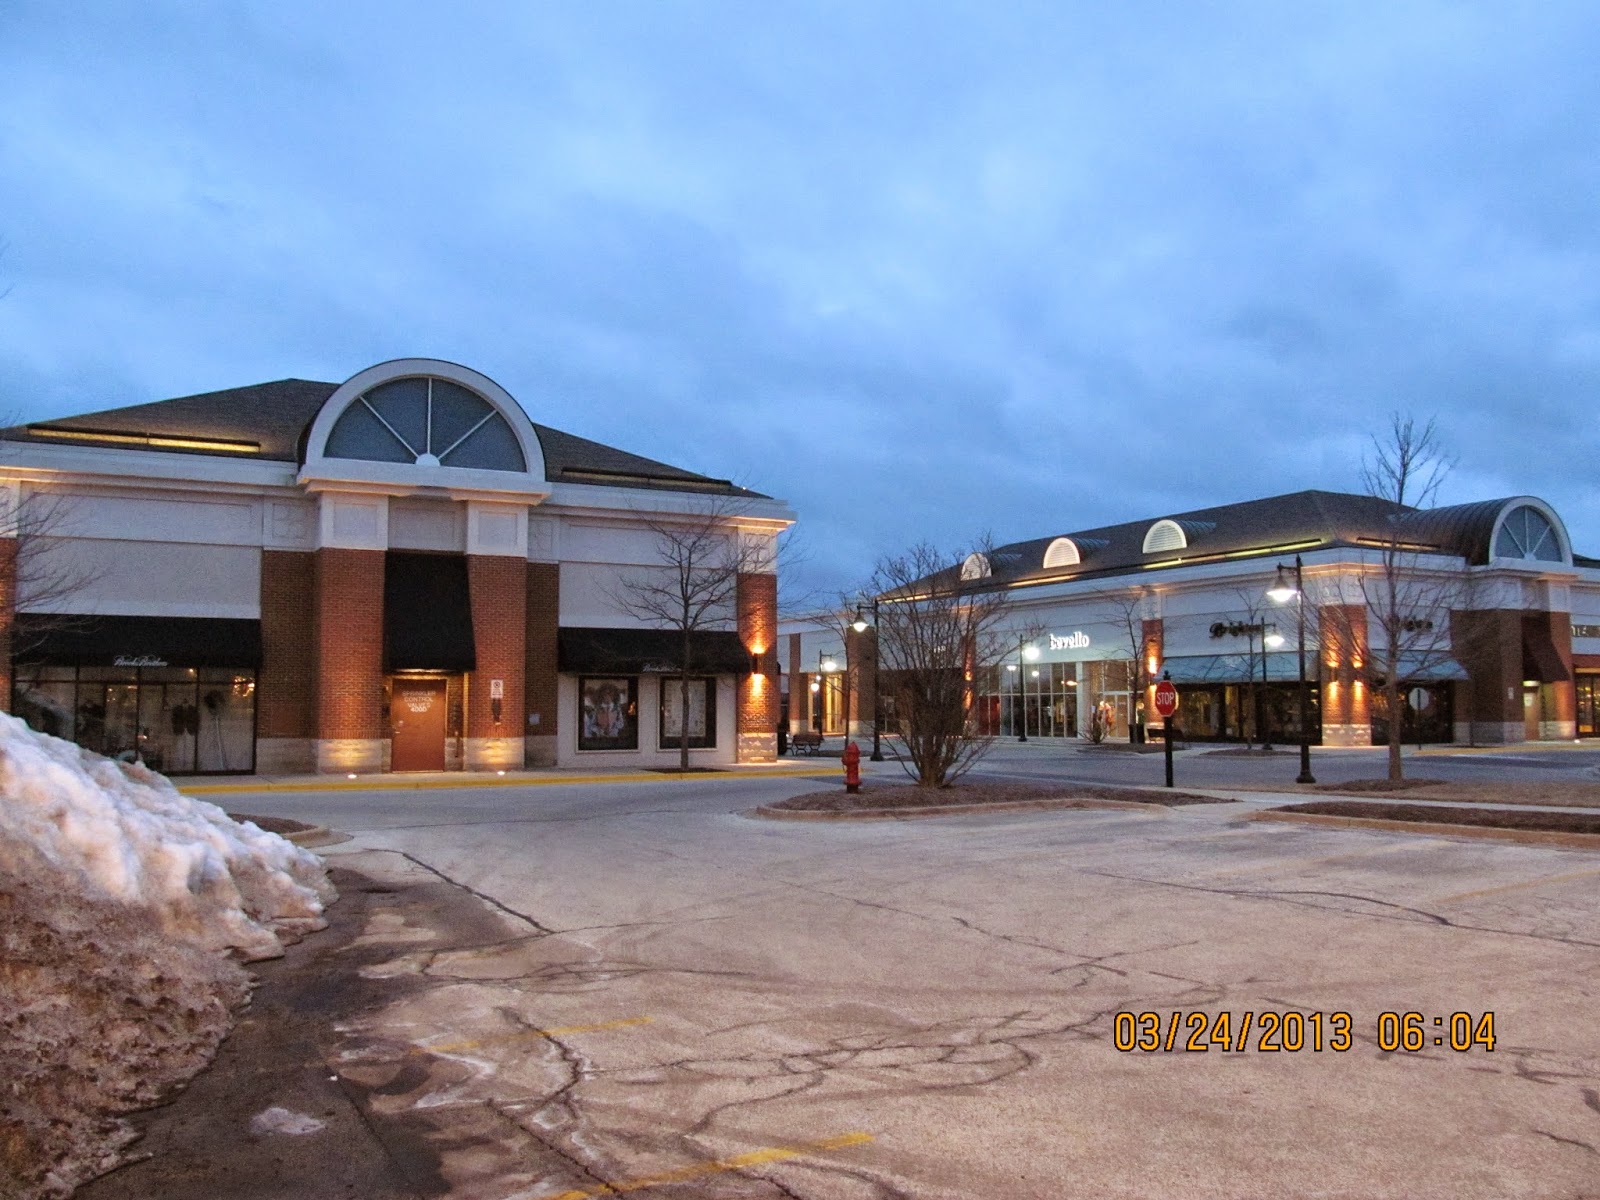 Trip to the Mall: Deer Park Town Center- (Deer Park, IL)